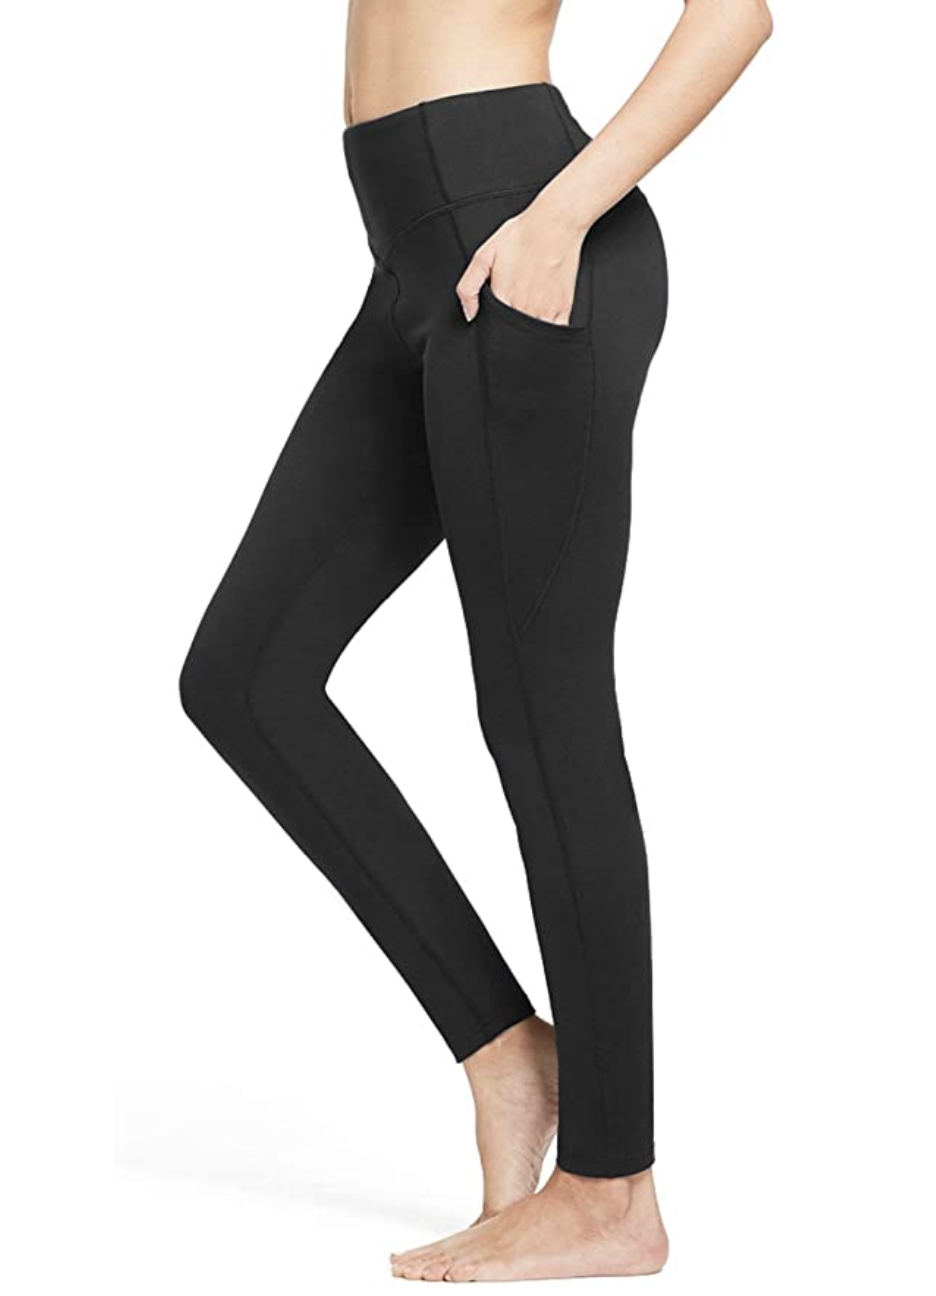 The Baleaf Fleece-Lined Winter Leggings Are on Sale at